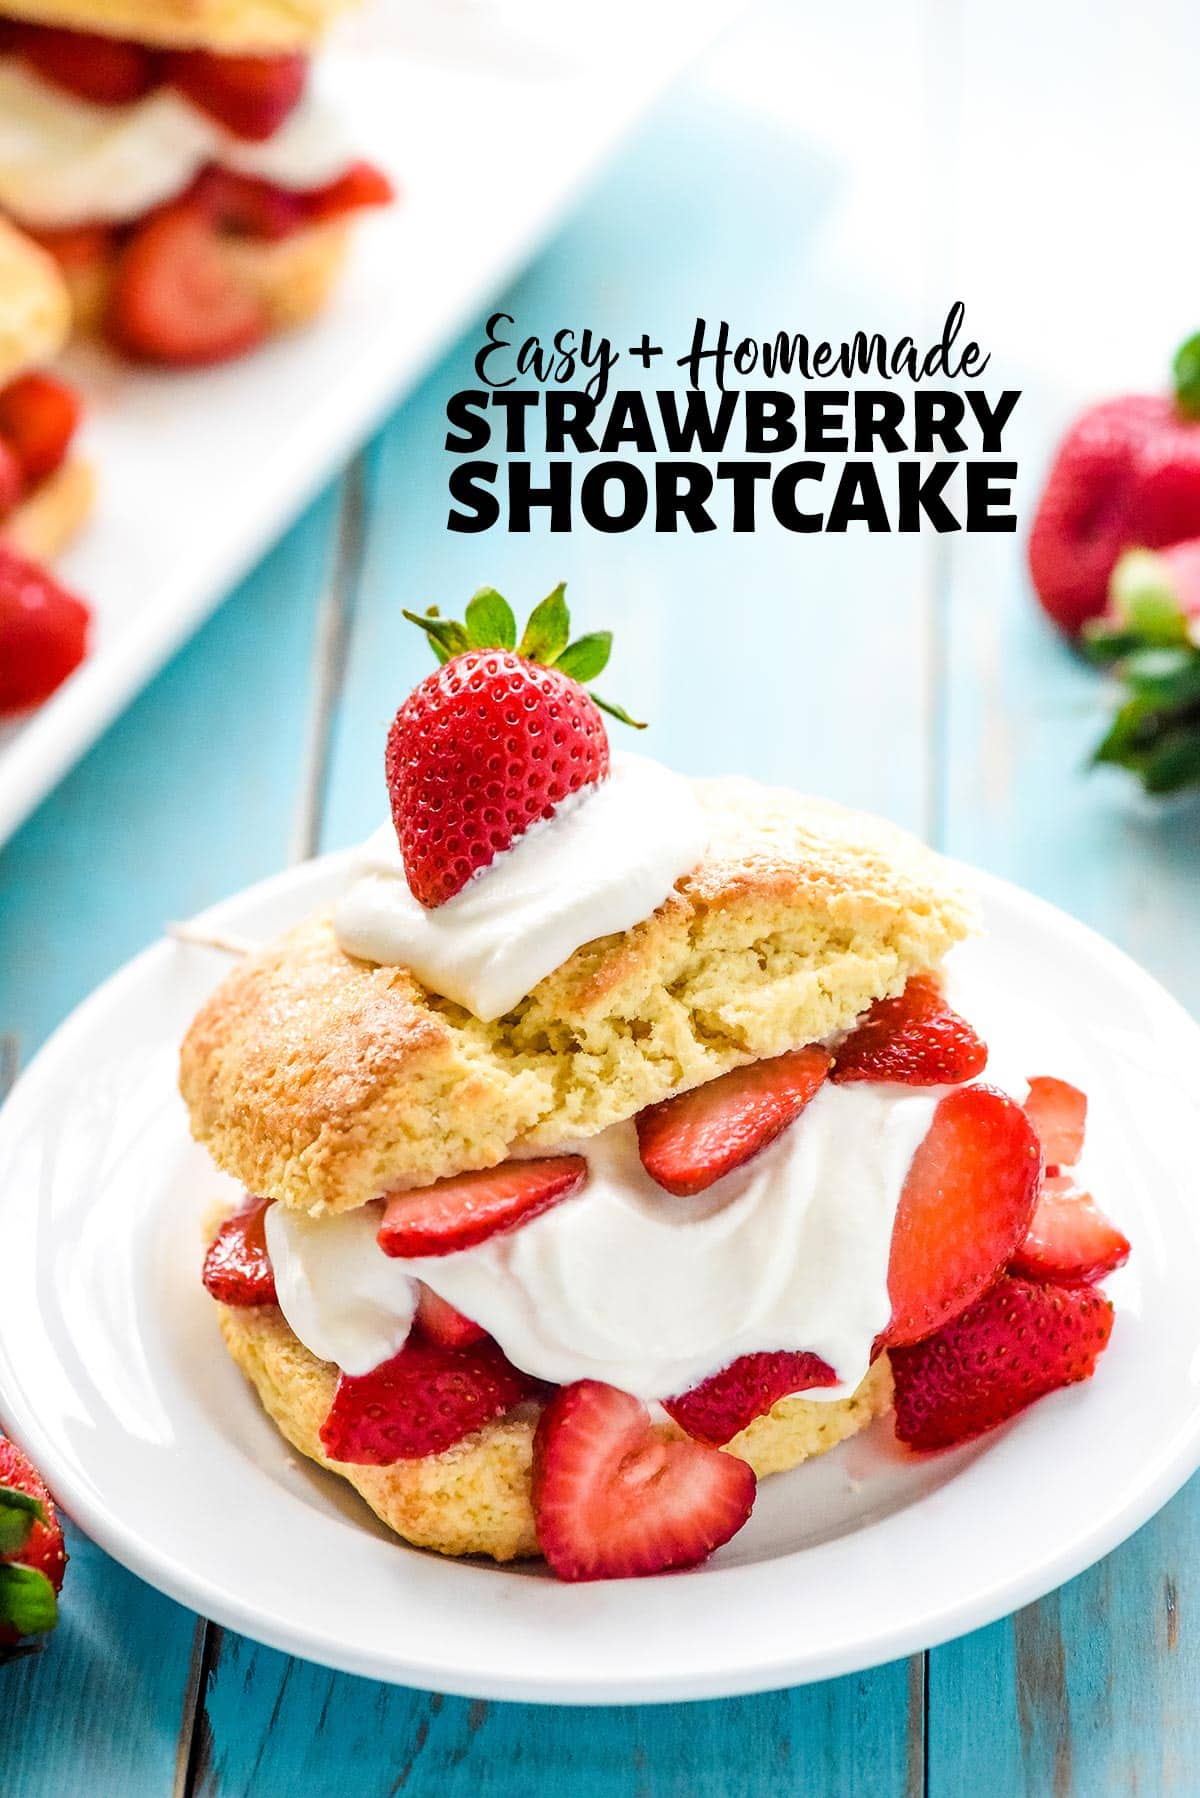 Strawberry Shortcake that's easy and homemade, with text.